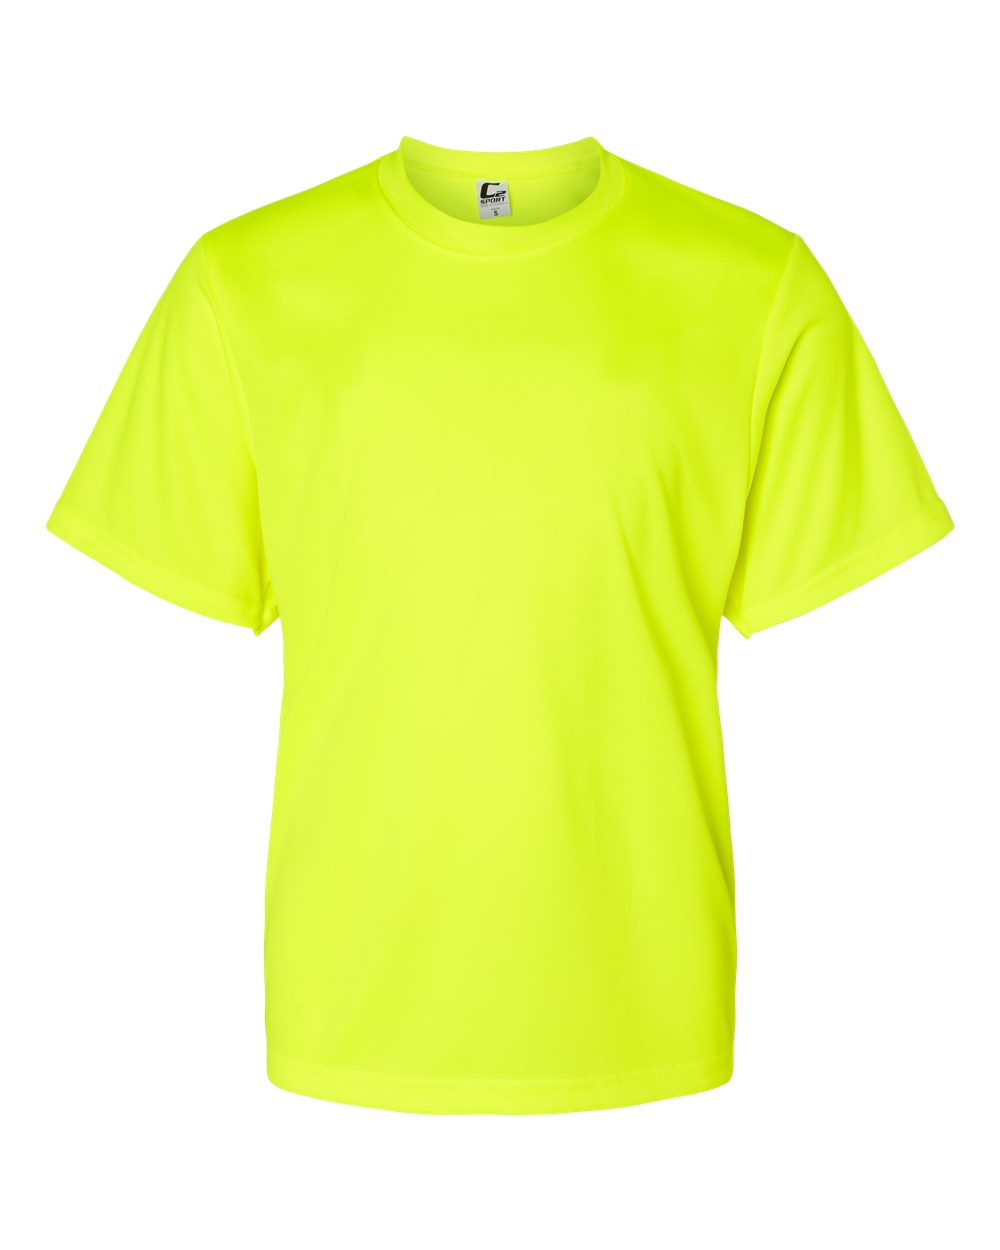 C2 Sport Youth Performance T-Shirt 5200 #color_Safety Yellow